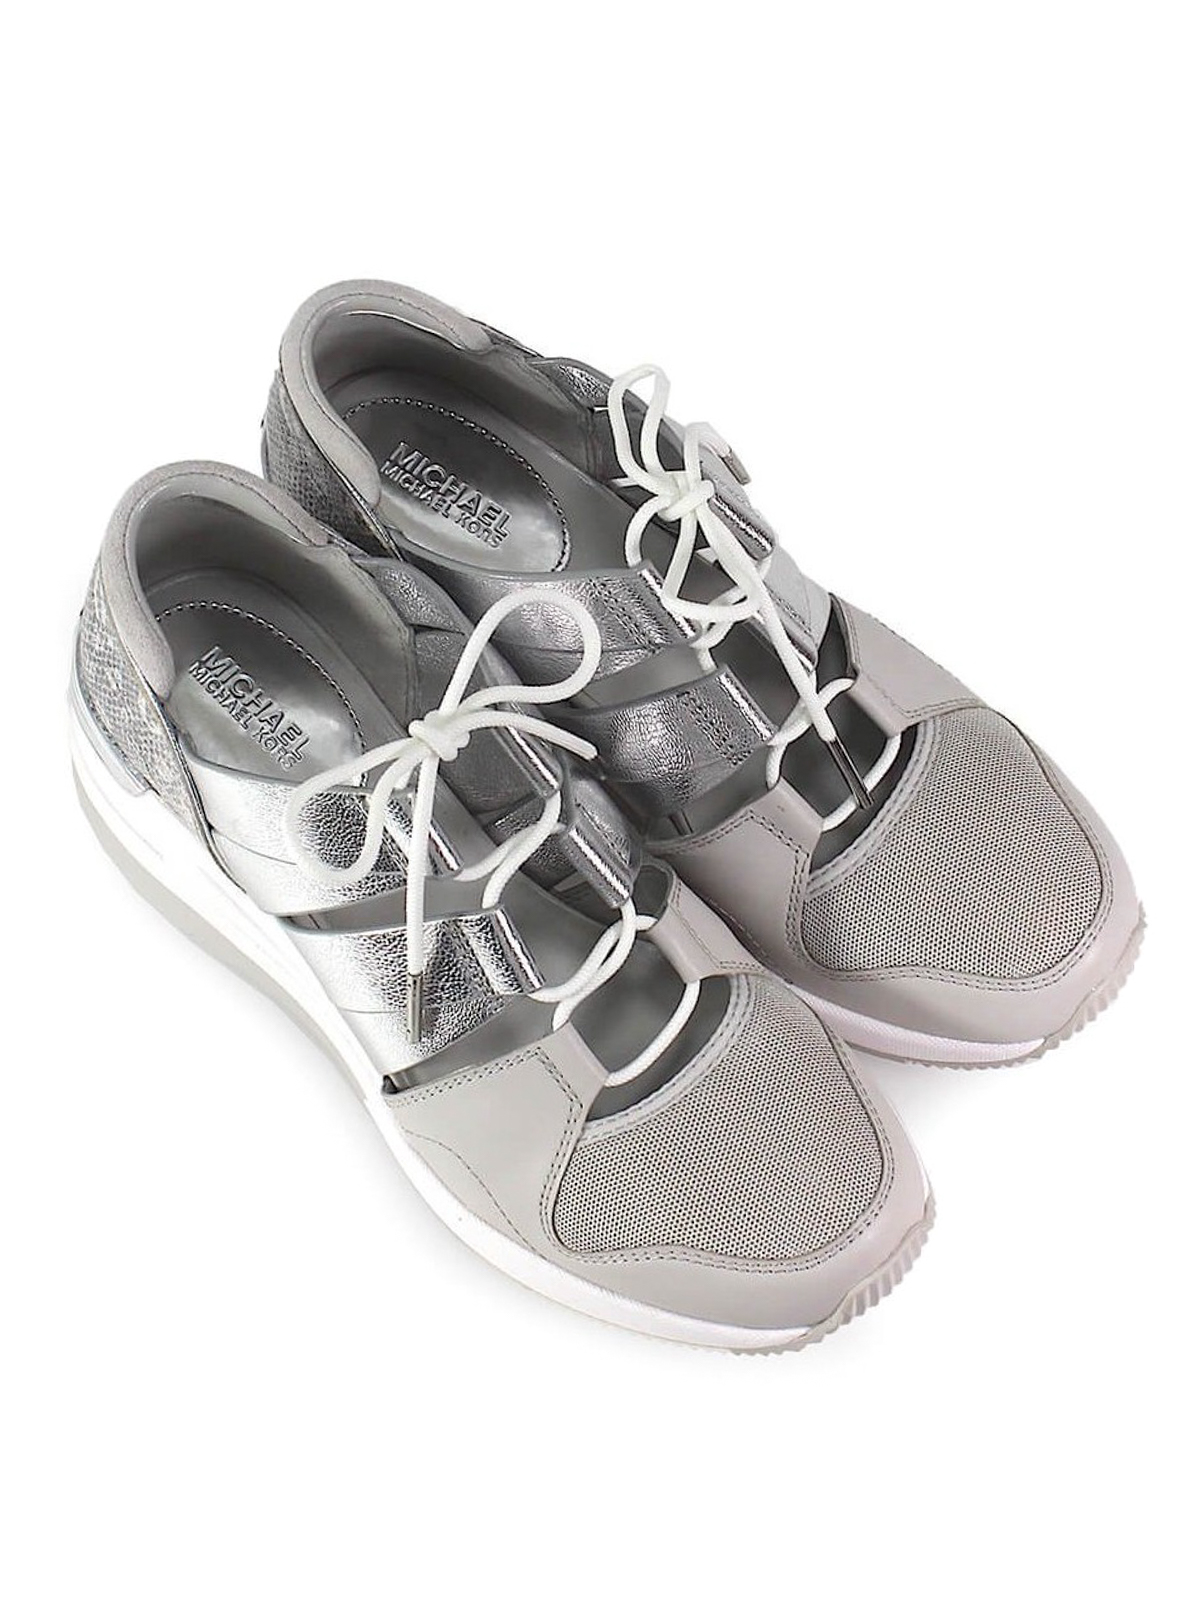 Trainers Michael Kors - Beckett cut-out leather sneakers - 43S8BKFS3L983